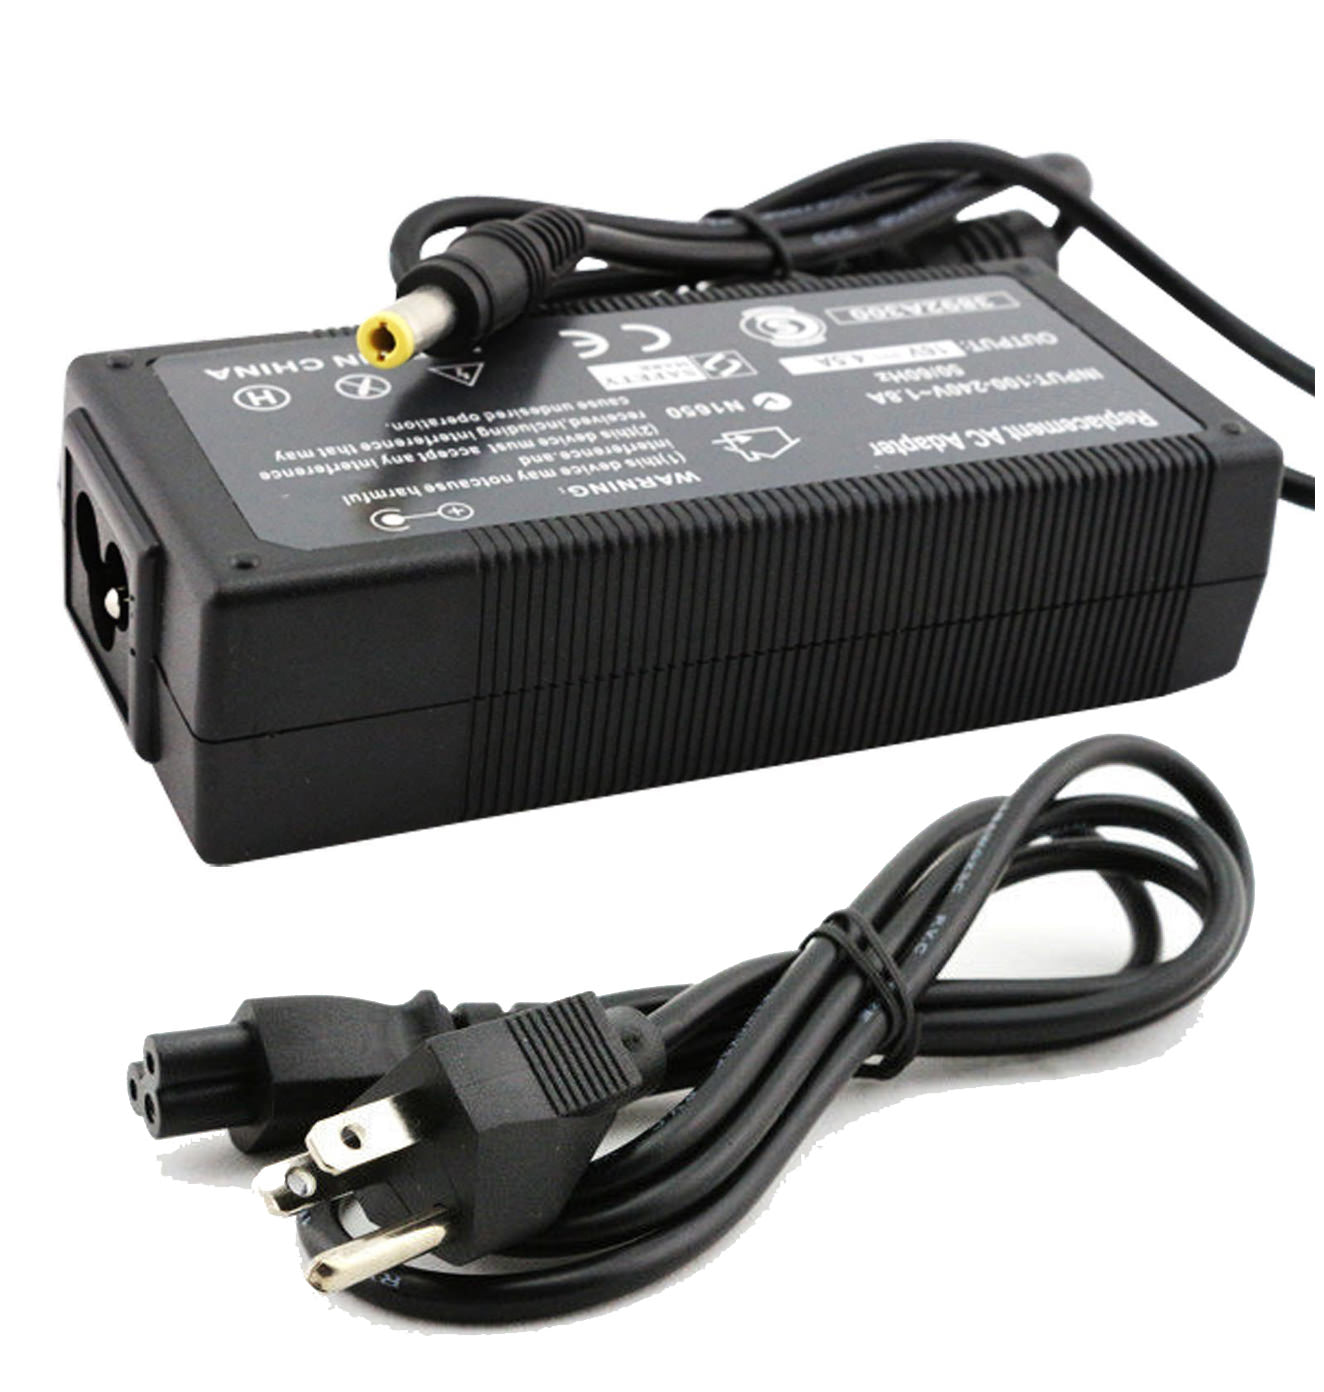 AC Adapter Charger for IBM ThinkPad R30 Notebook.